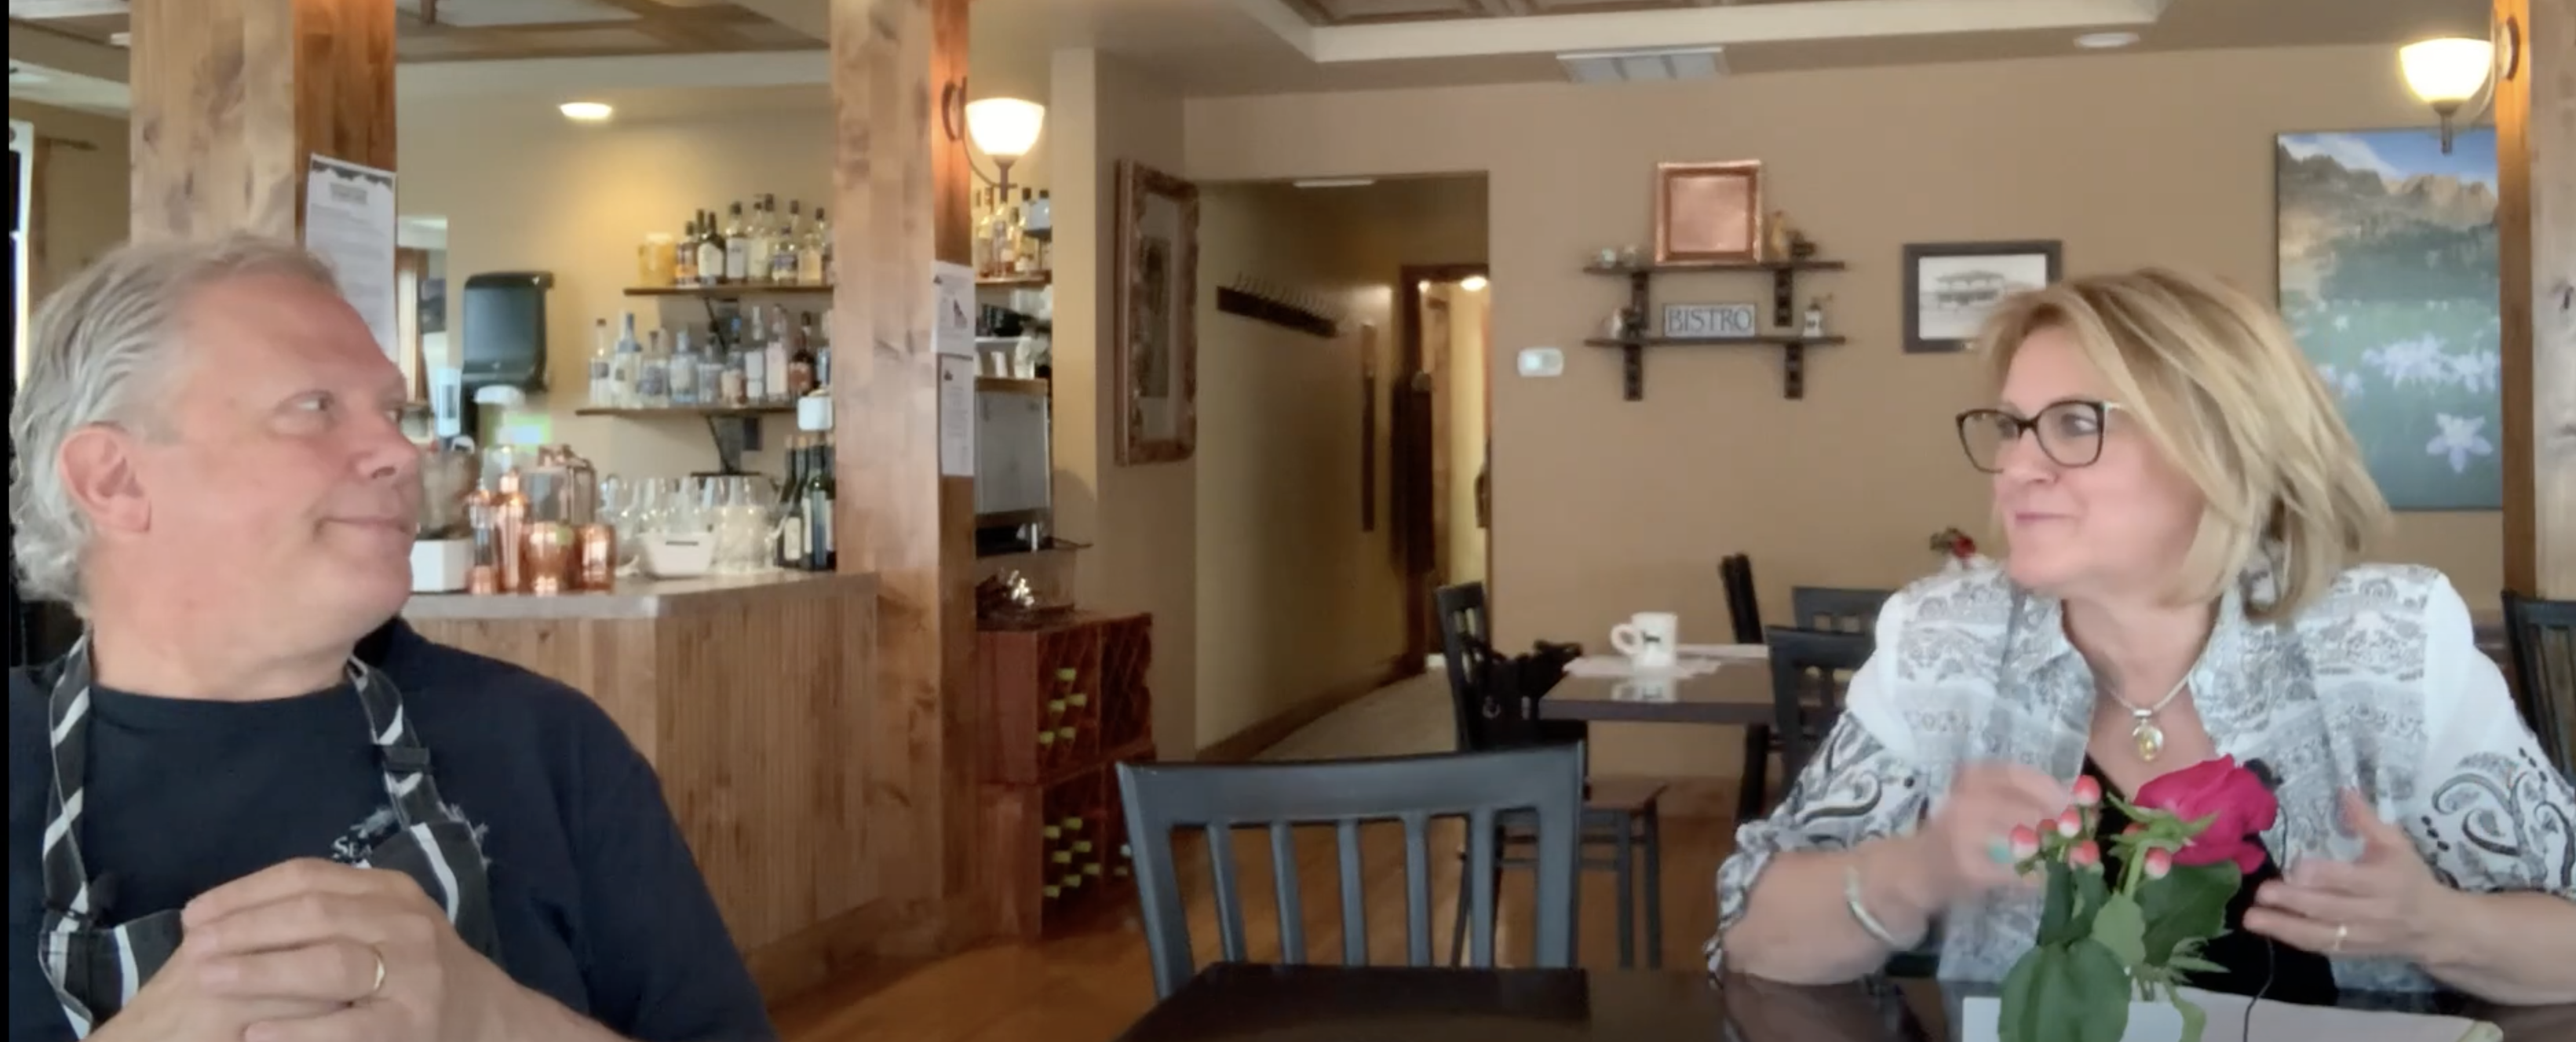 Meet Rob Corey, Owner/Chef of SEASONED – An American Bistro in Estes Park